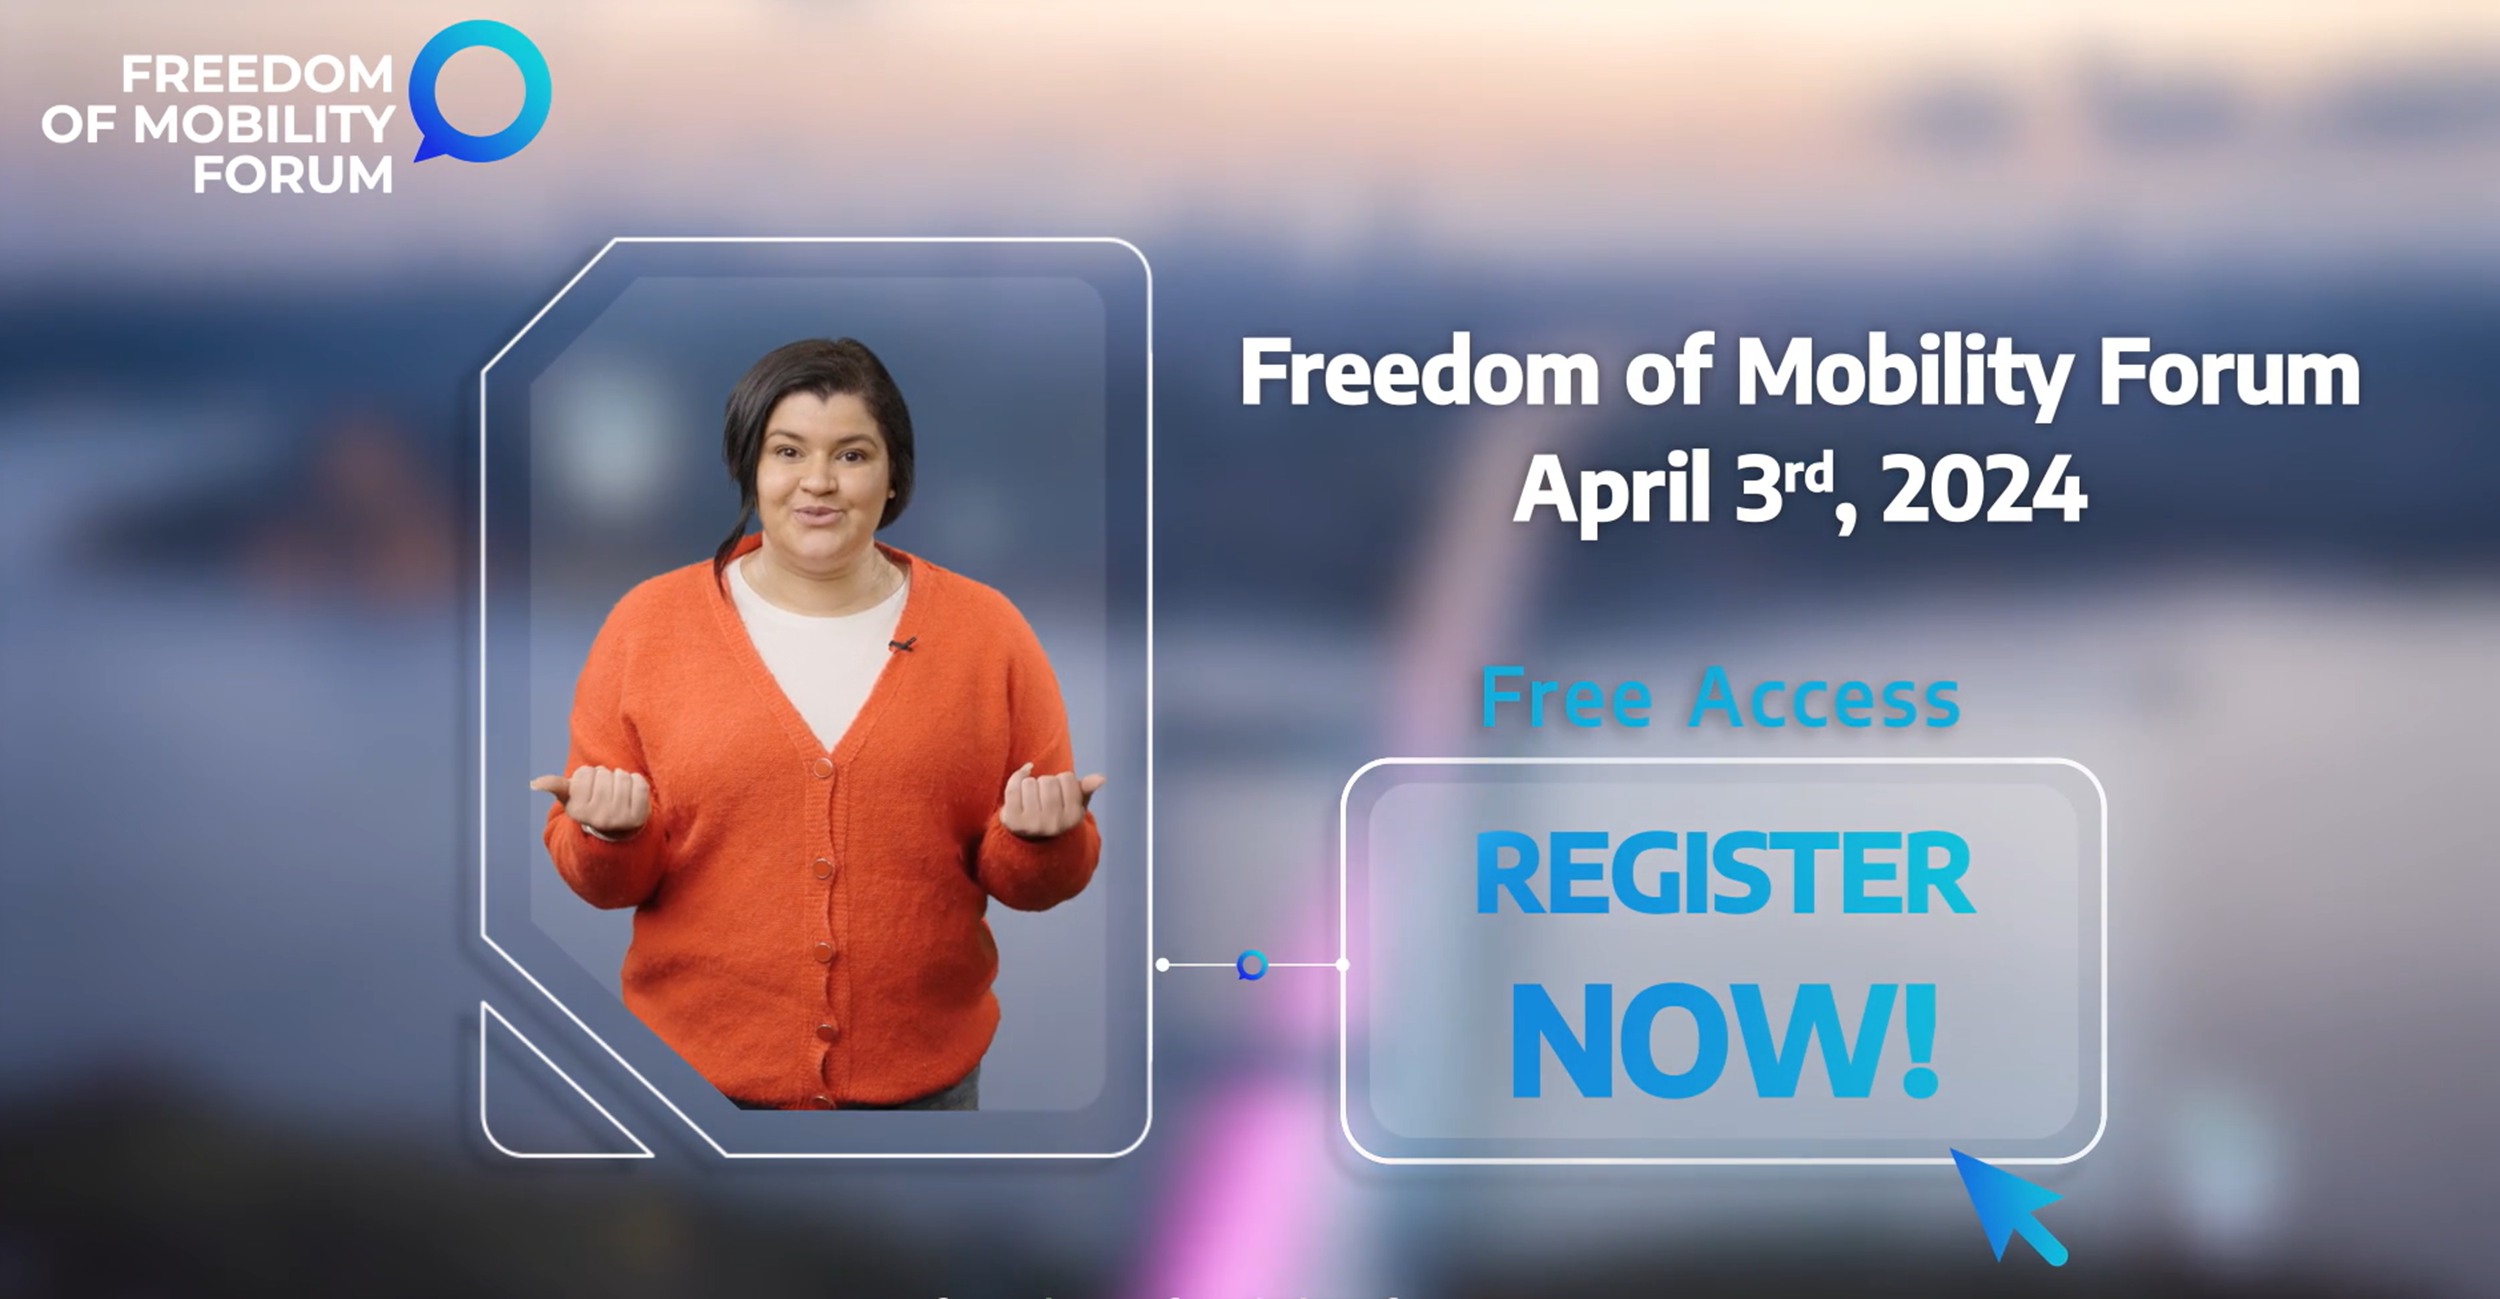 Register for the Second Annual Freedom of Mobility Forum Live Digital Debate on April 3